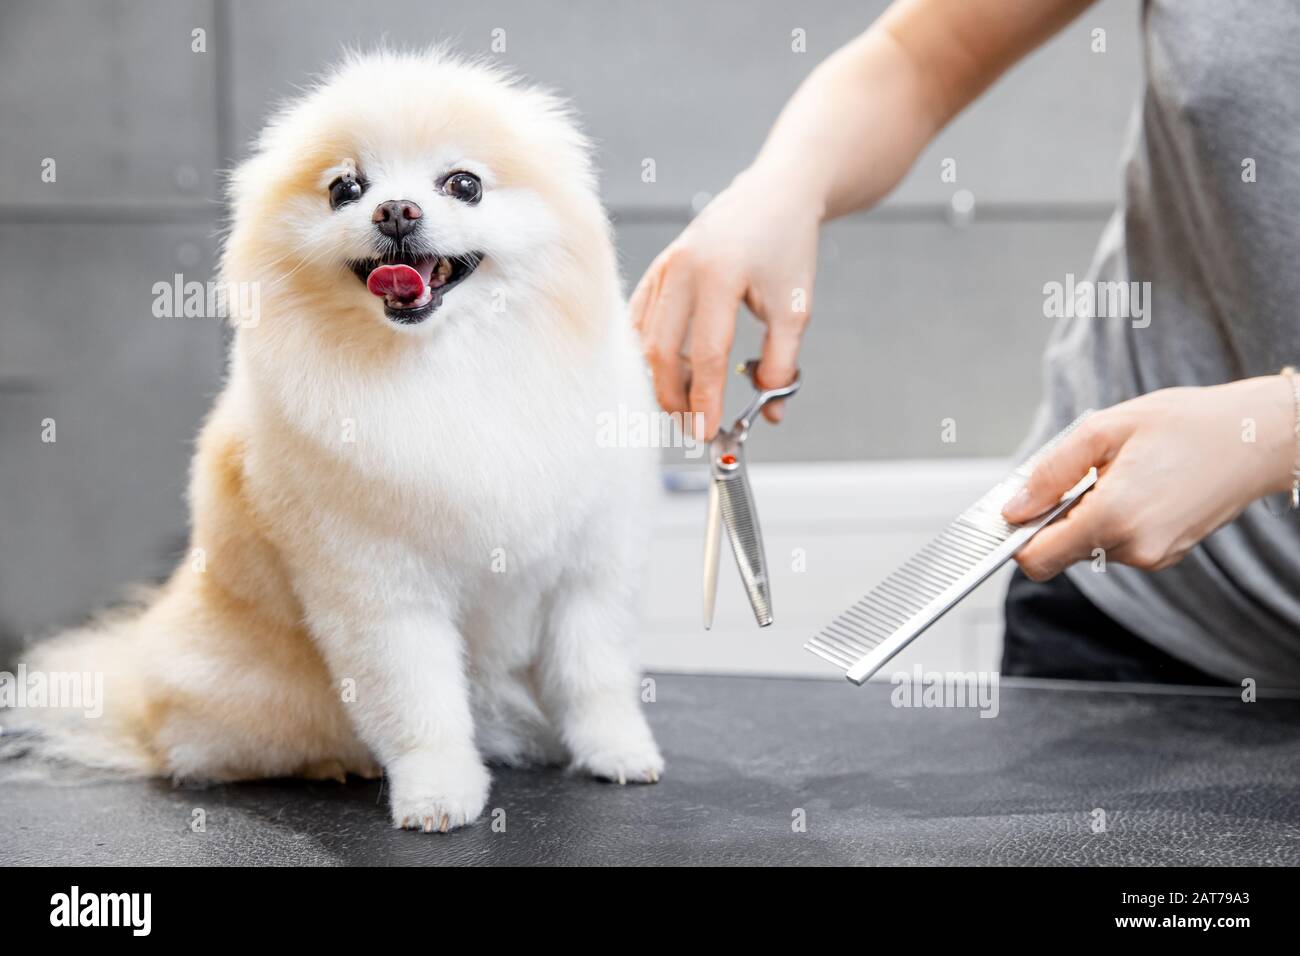 can you cut dogs hair with scissors